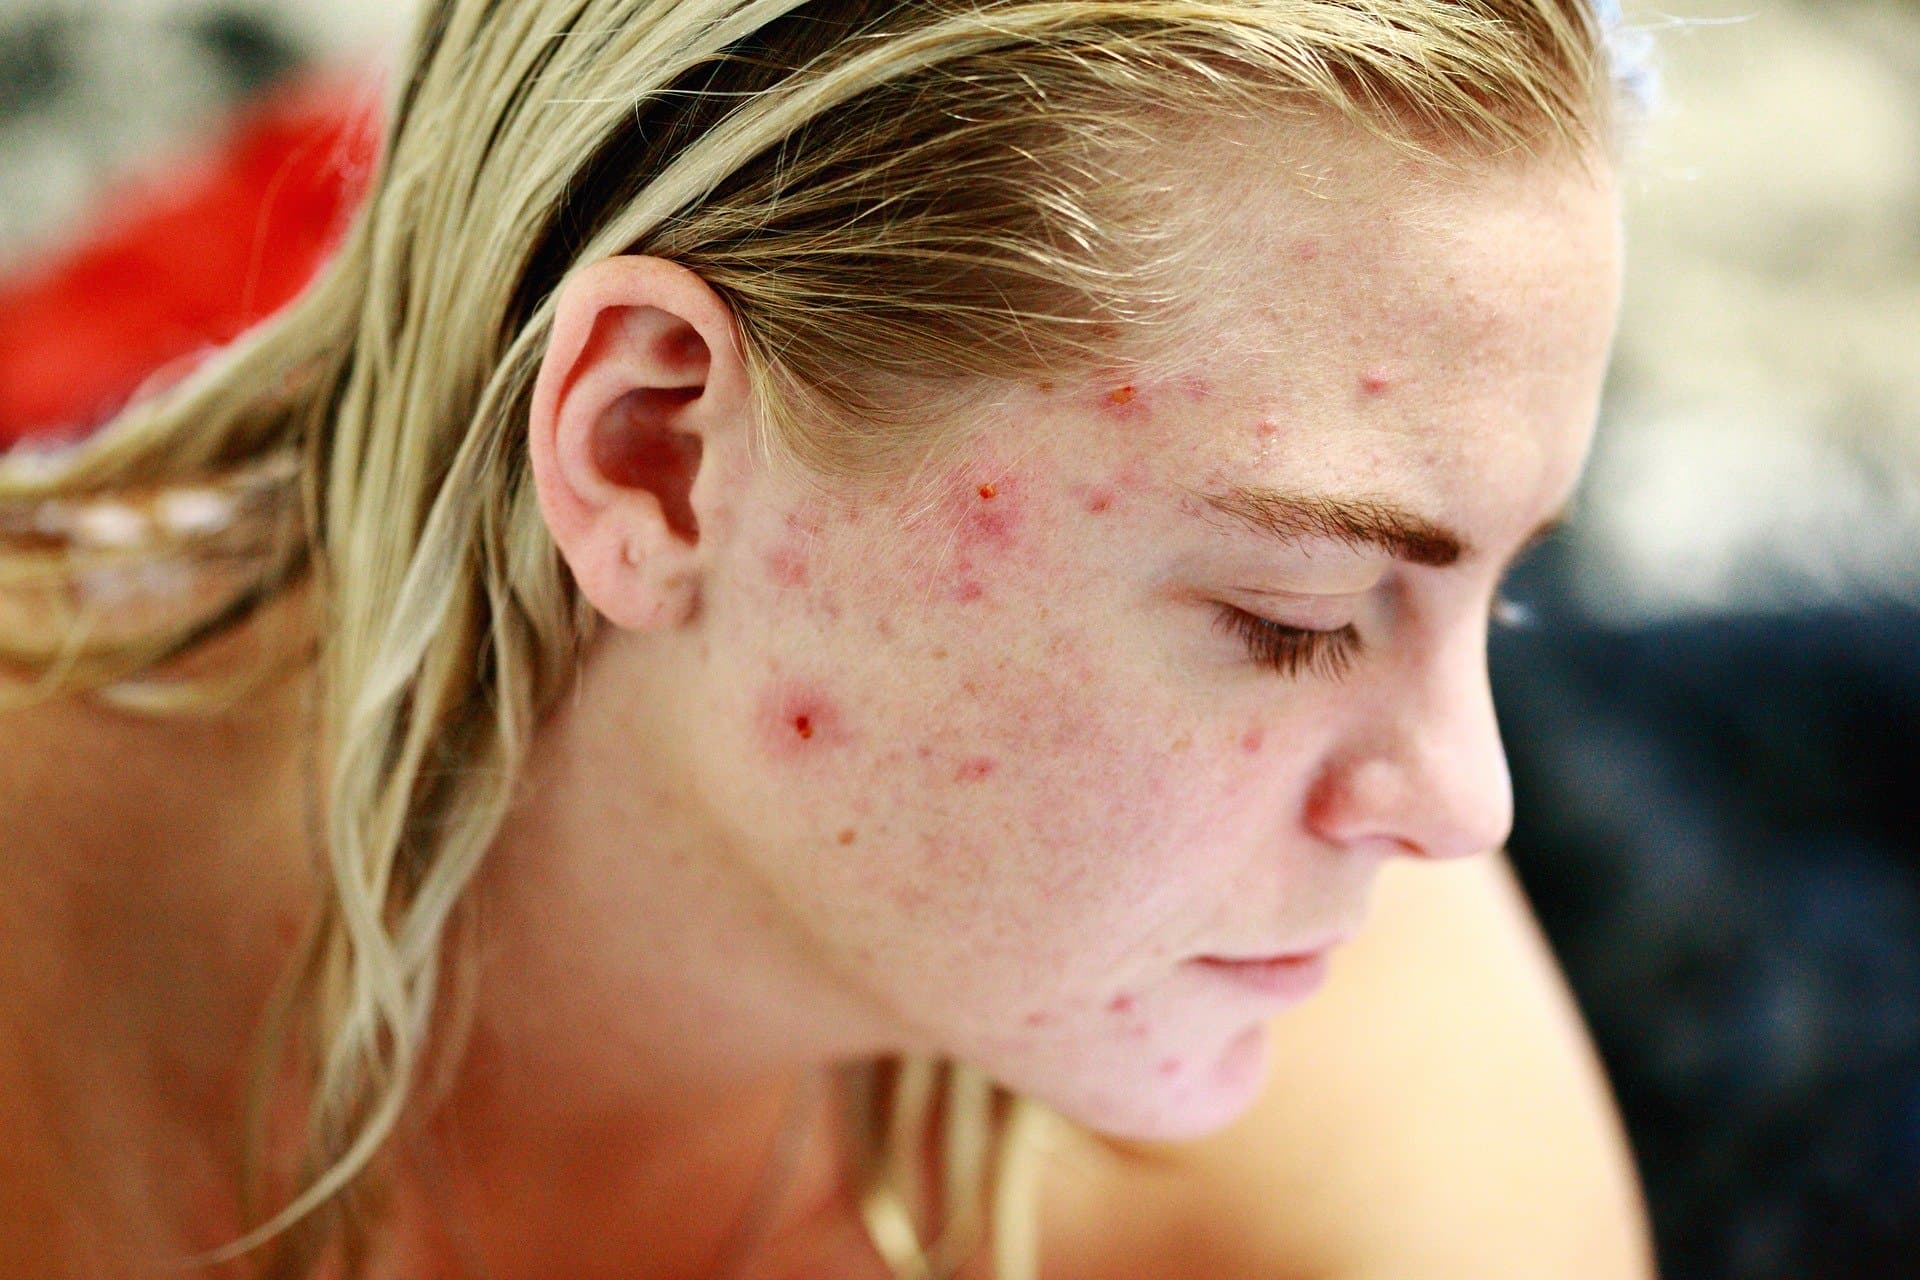 Close-up of woman's acne on her face